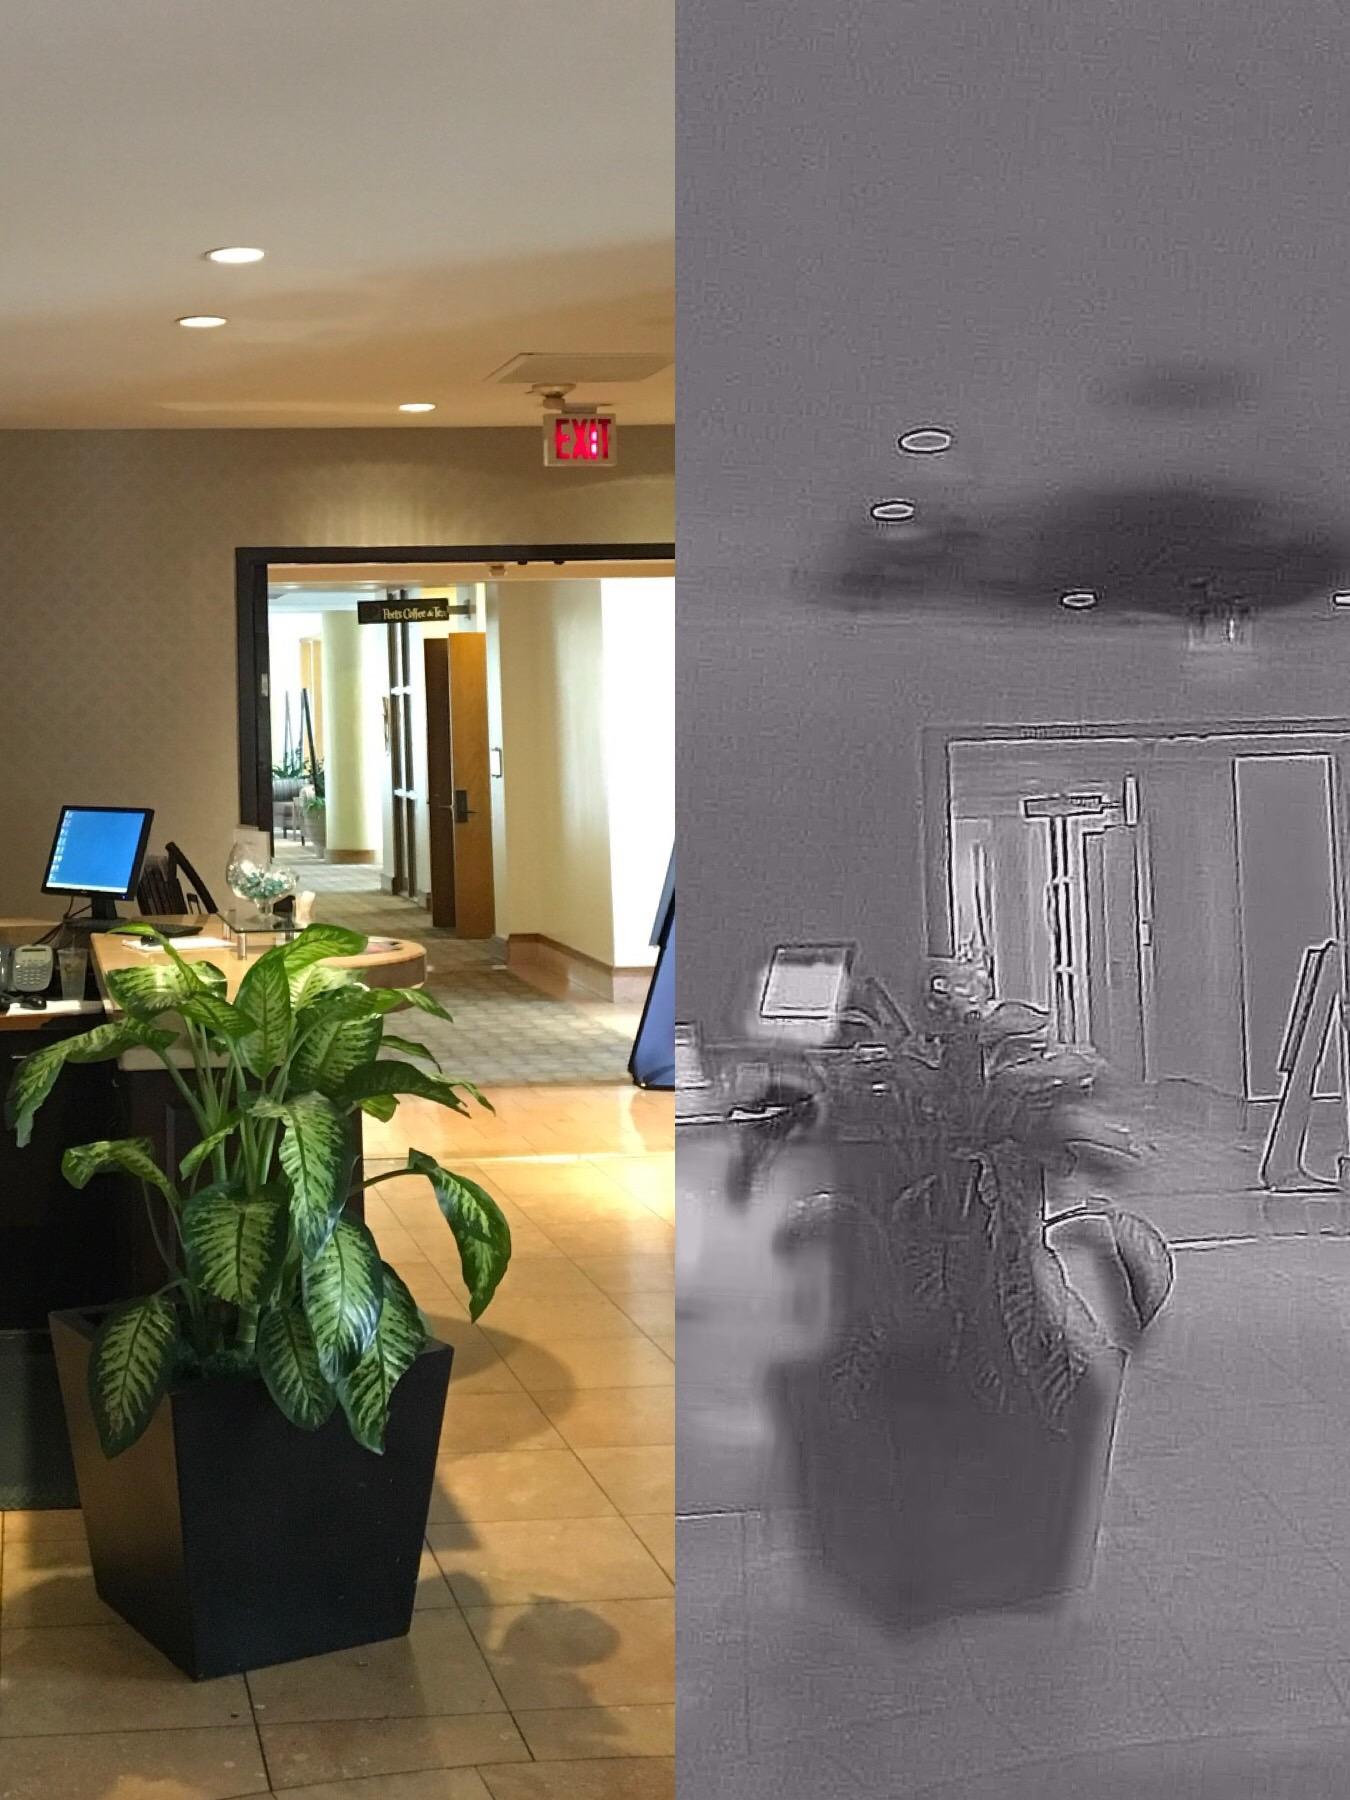 Sometimes a water loss can go unnoticed. Using our thermal cameras we were able to locate the water loss to be able to begin our restoration process.